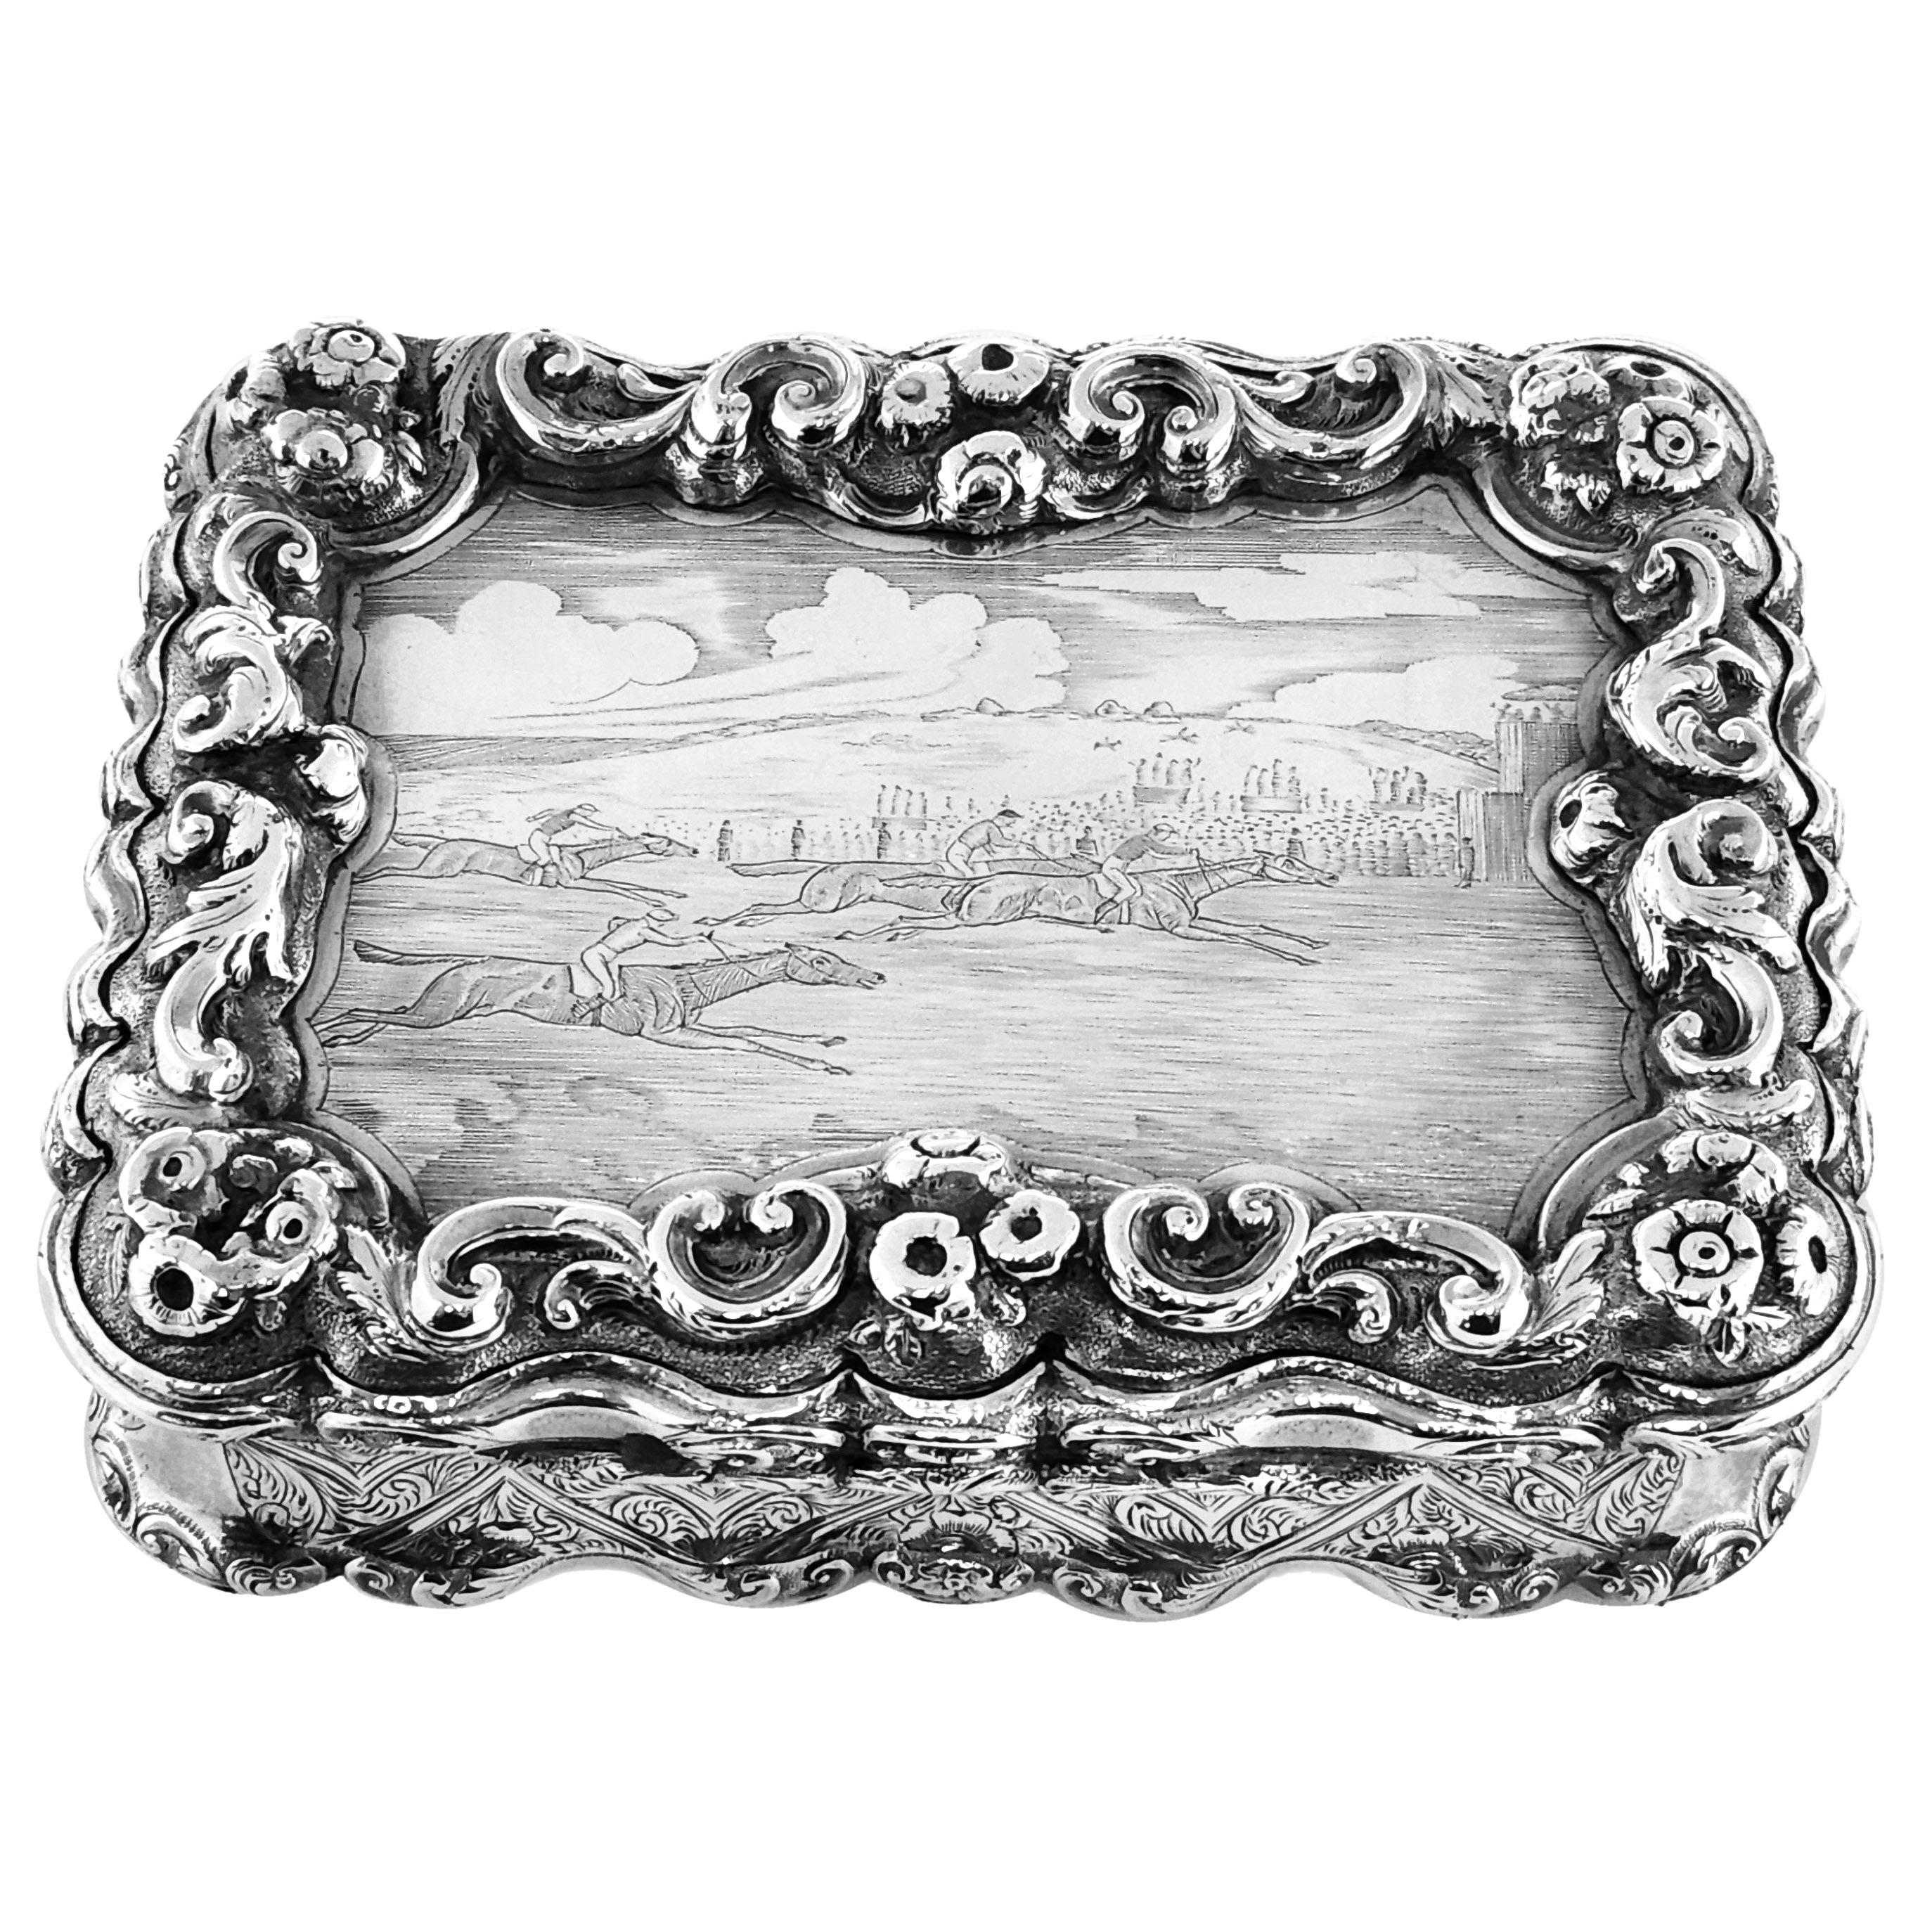 An impressive Antique Victorian solid Silver Table Snuff Box with an ornate chased border and an engraved horse racing scene on the lid. The rectangular Box has a decorative shaped border and is embellished with an engraved floral design on the